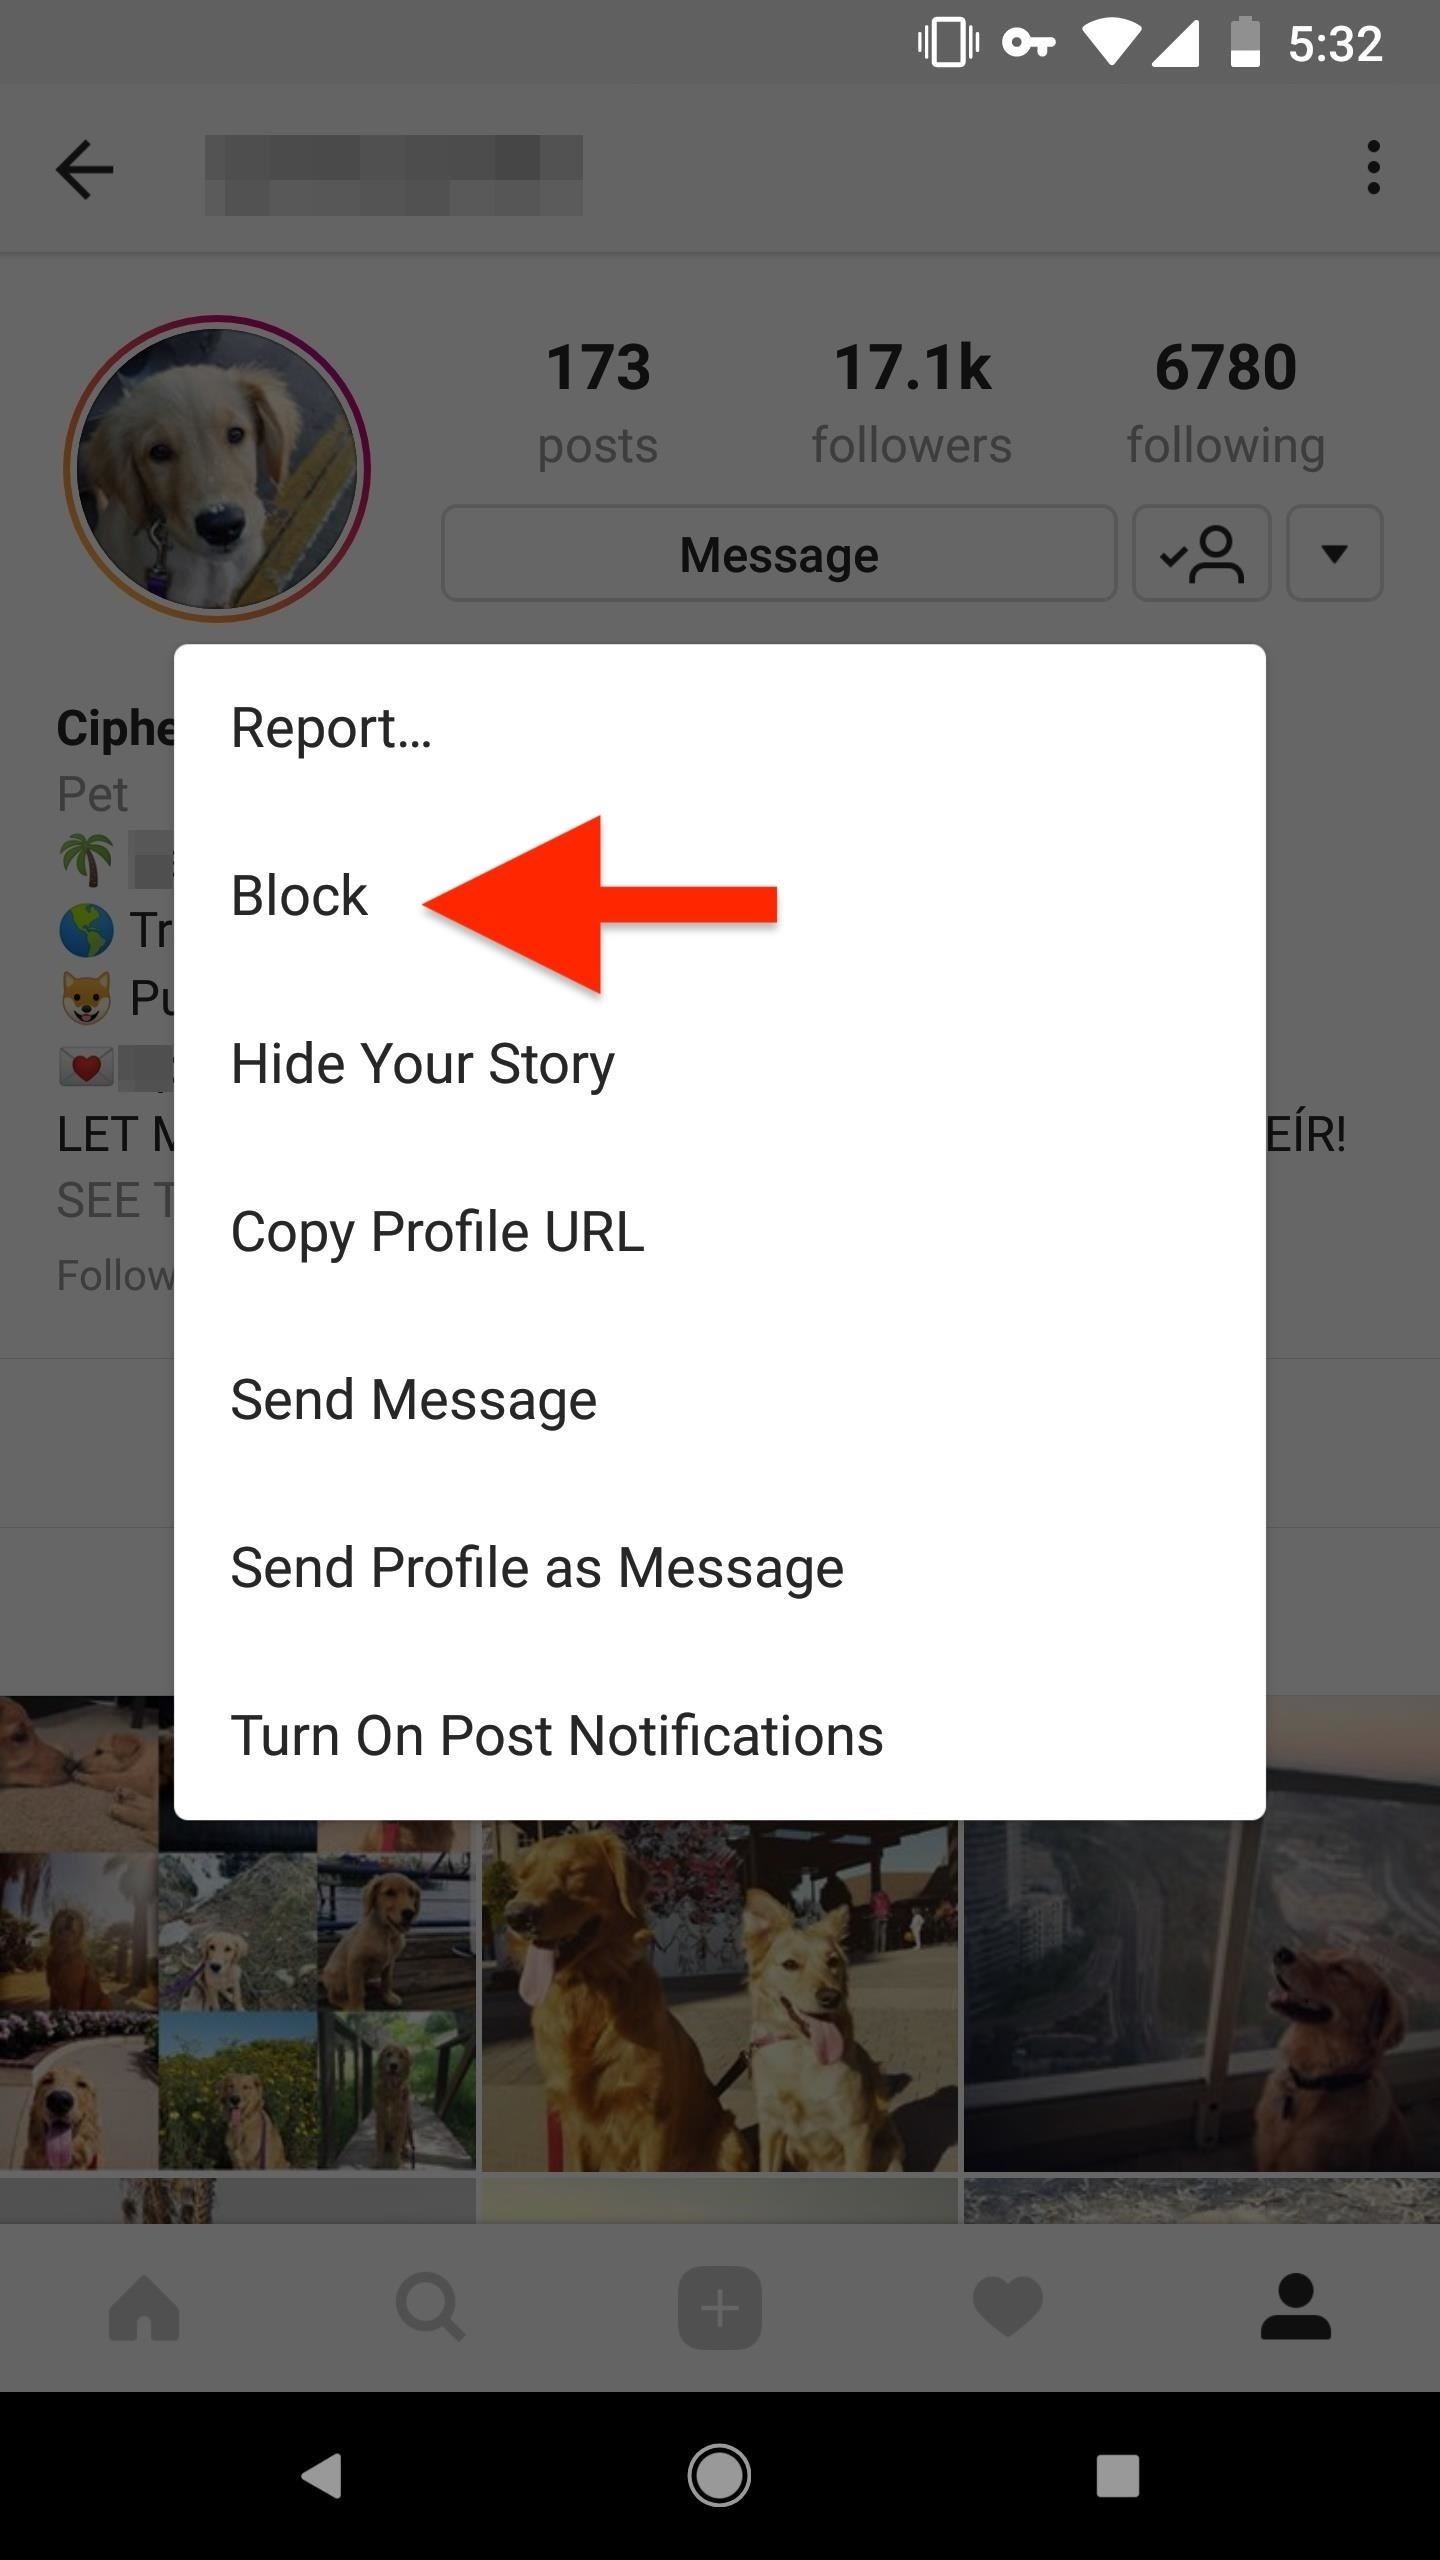 Stop Oversharing & Reduce Your Online Footprint with These 9 Instagram Privacy Tips